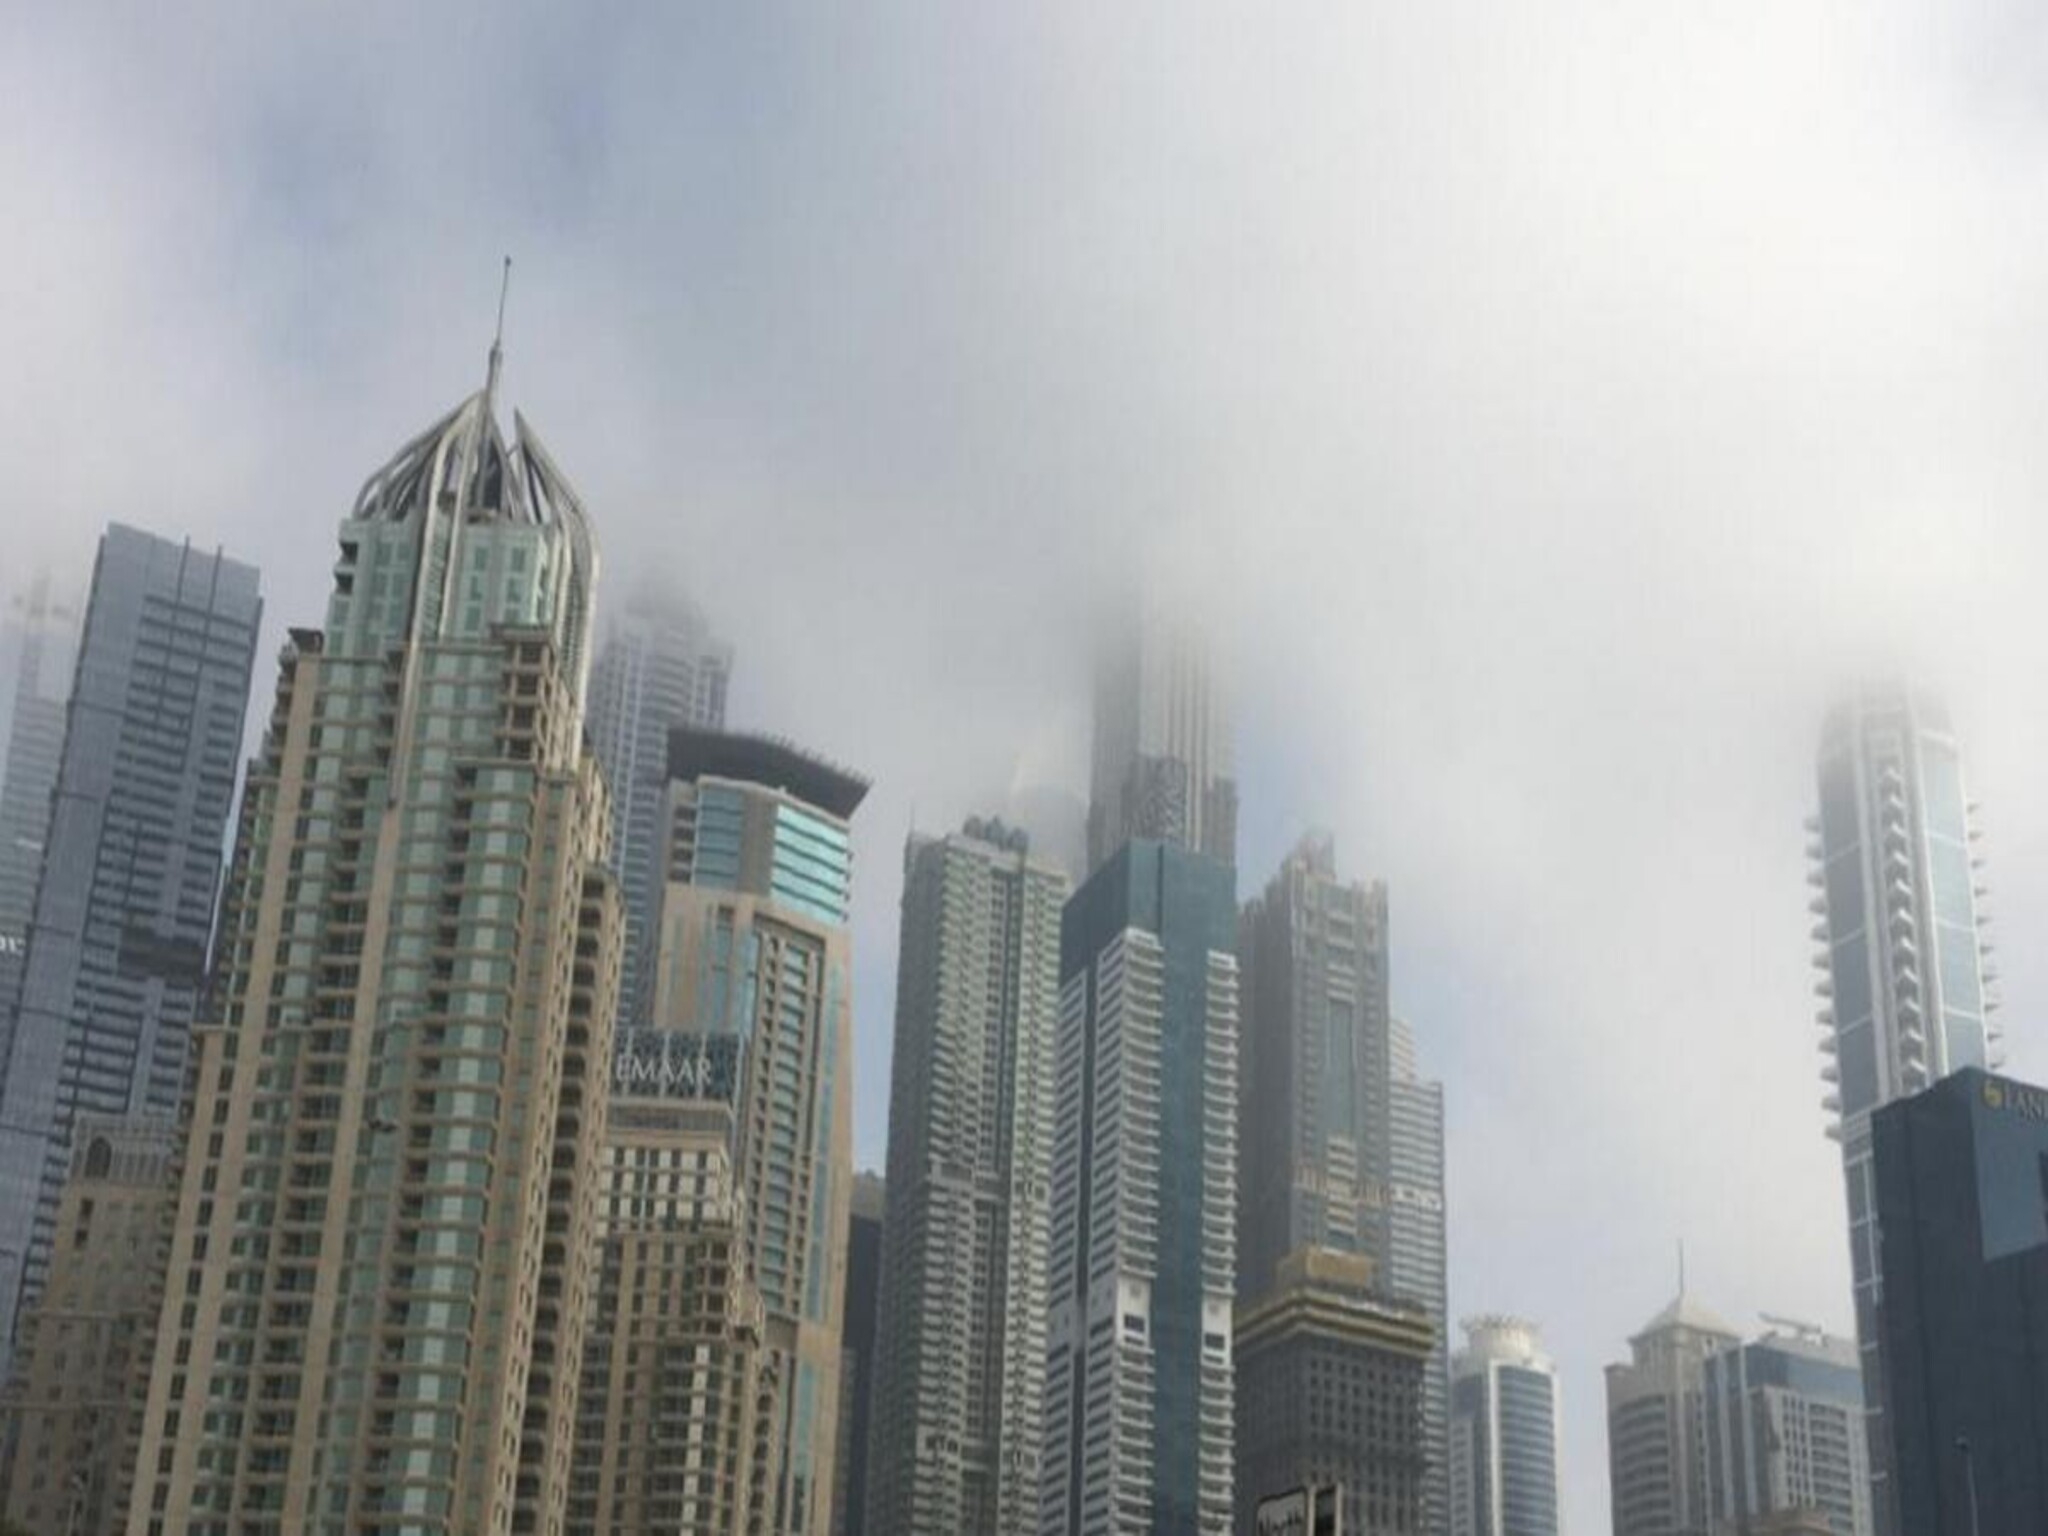 The weather forecast in the Emirates today warned of rain in some areas